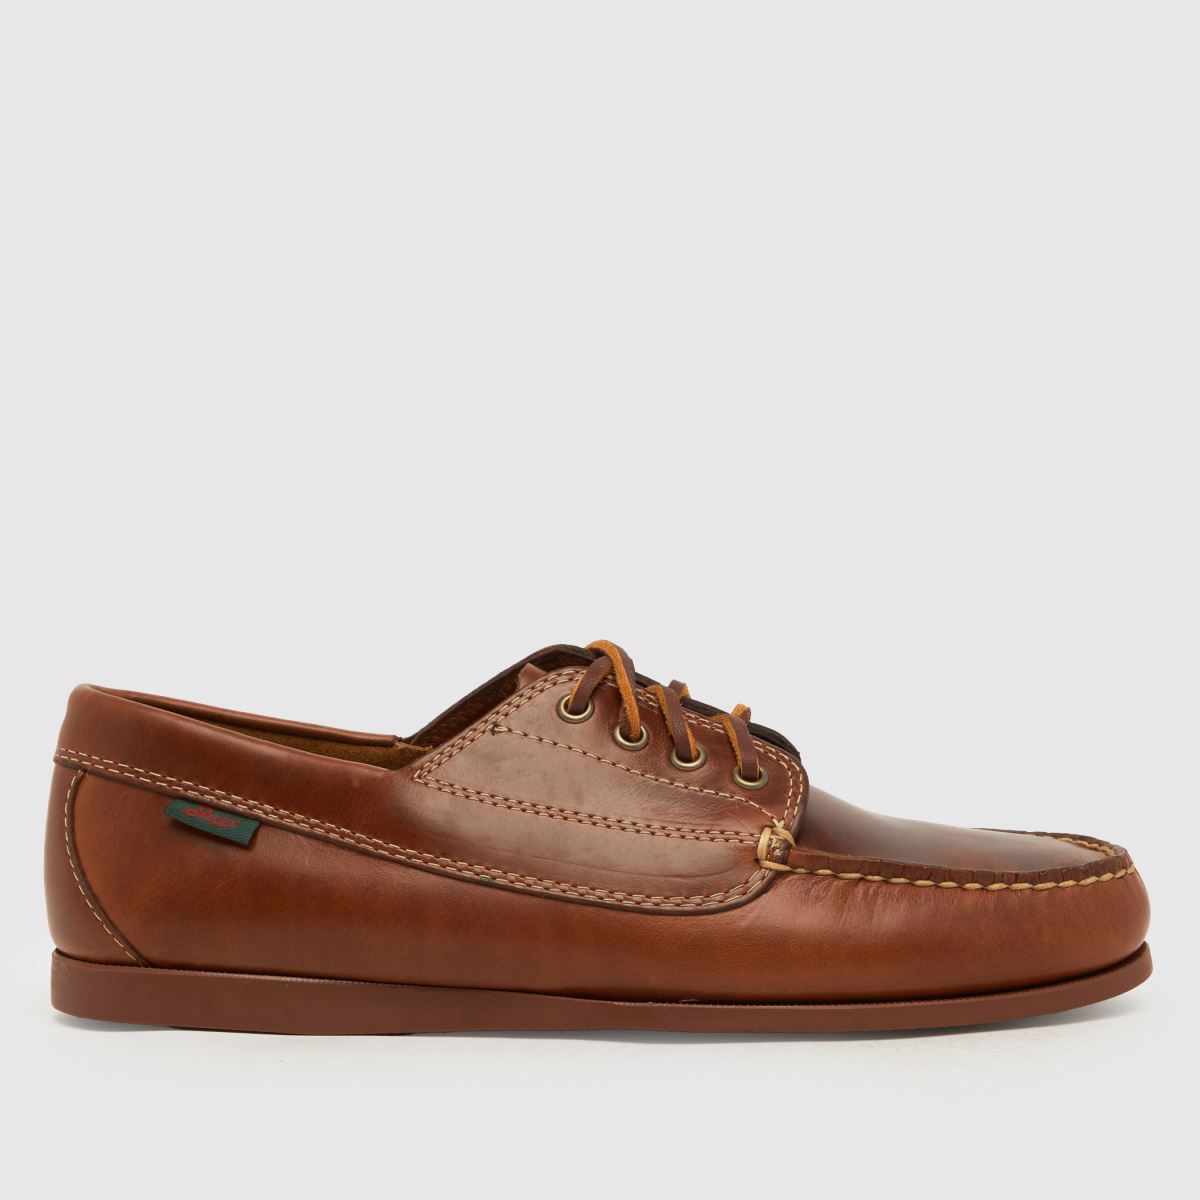 G.H. BASS camp moc shoes in brown